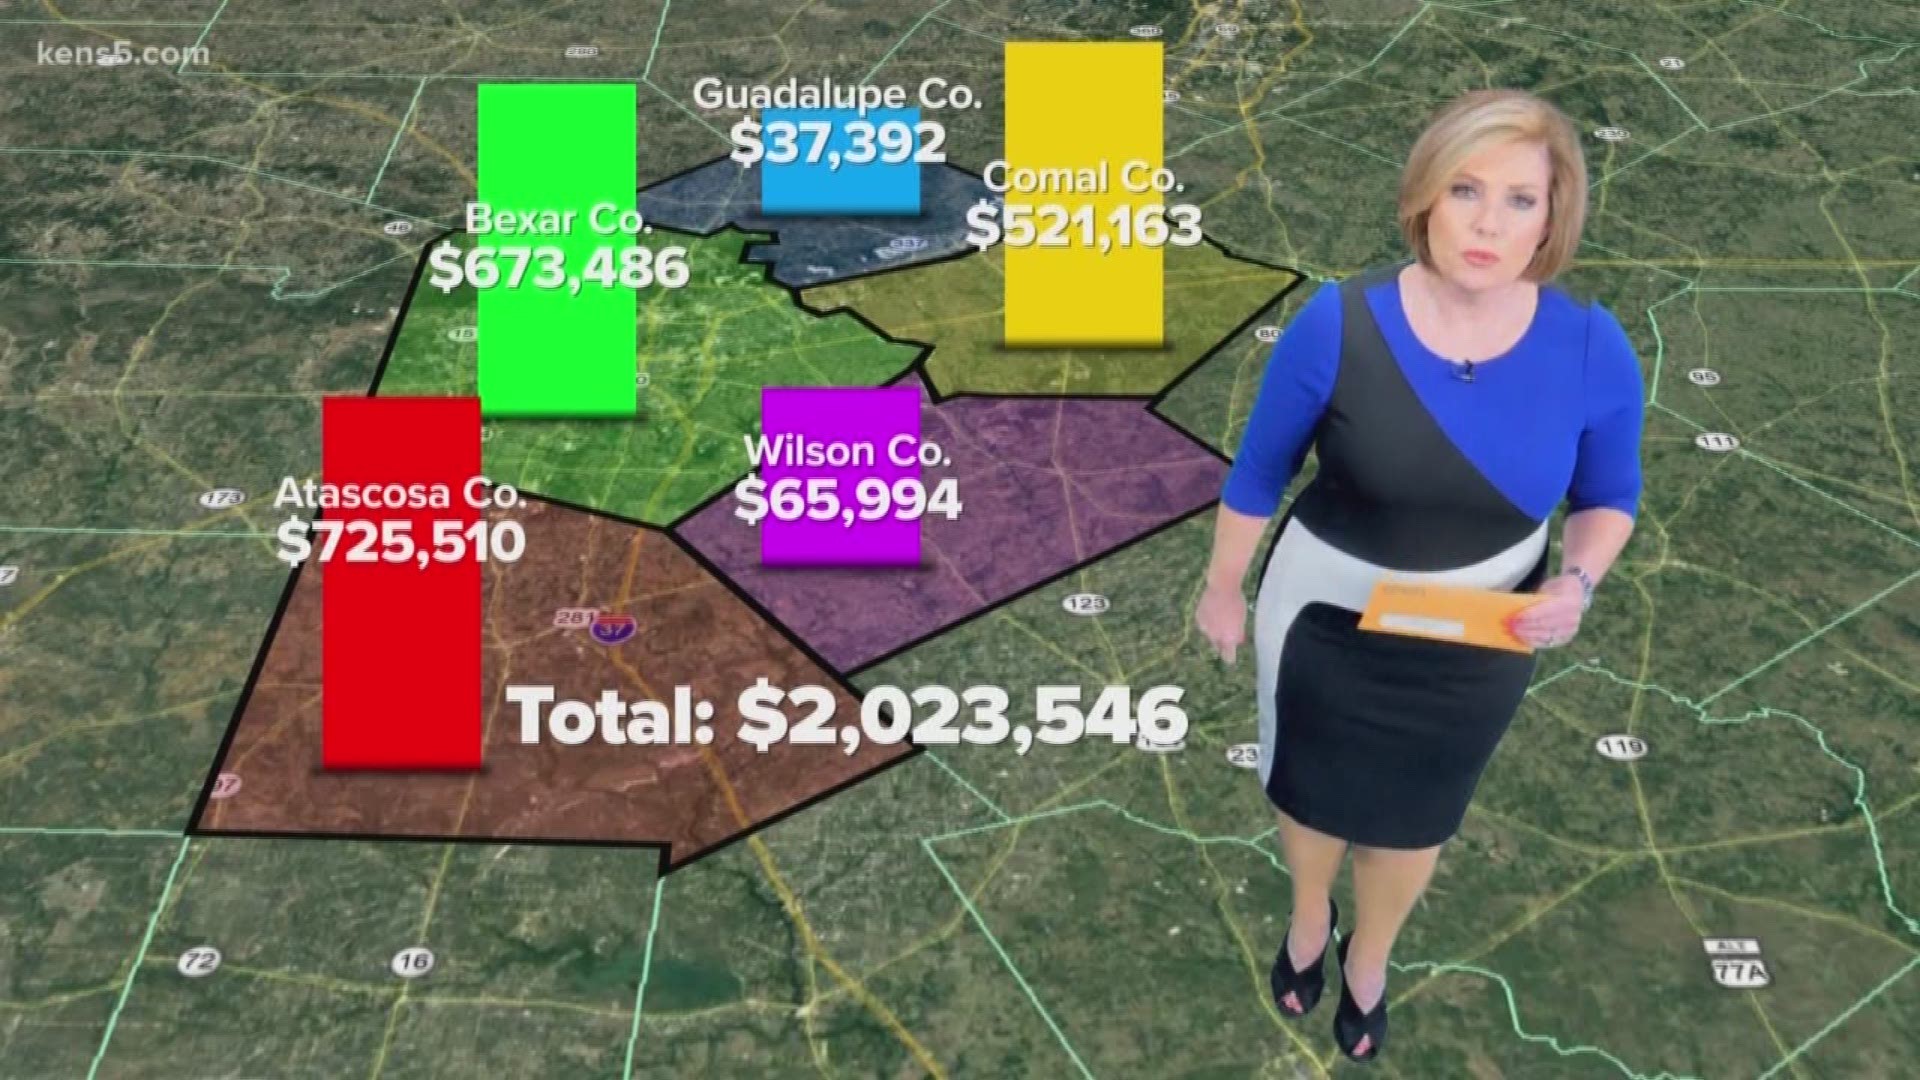 There is more than $231 million in medical debt plaguing San Antonio families – so KENS 5 decided to make some of it go away.